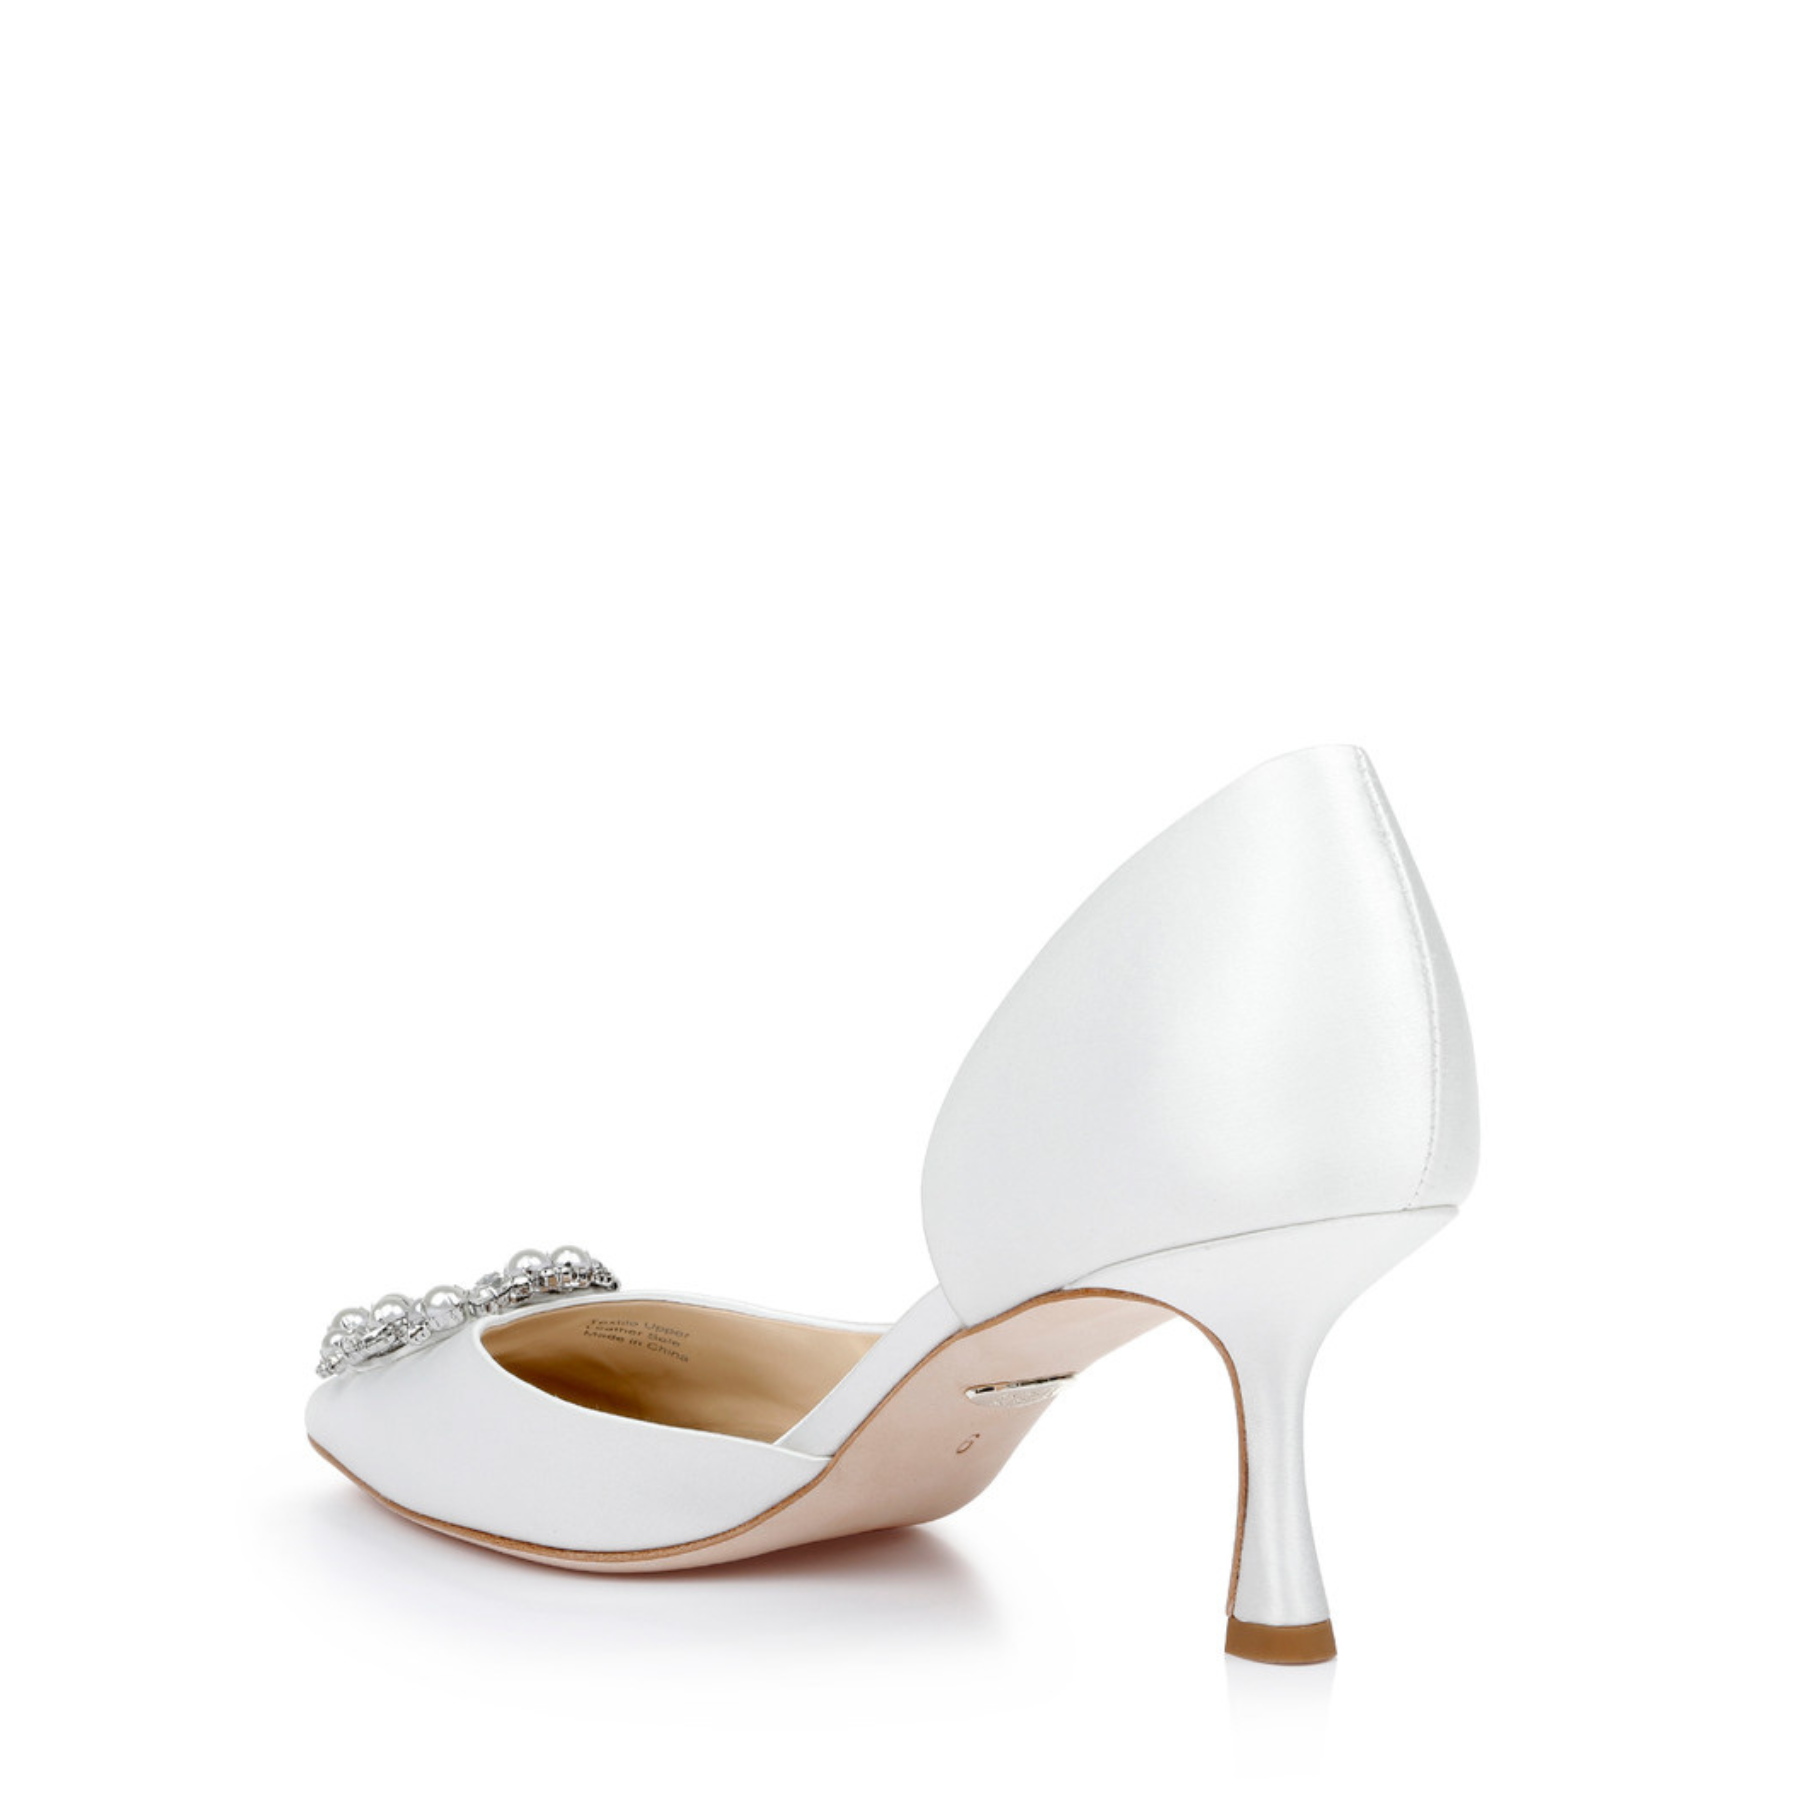 Fabia - D’Orsay Kitten Heel With Pearl & Crystal Buckle - Soft White